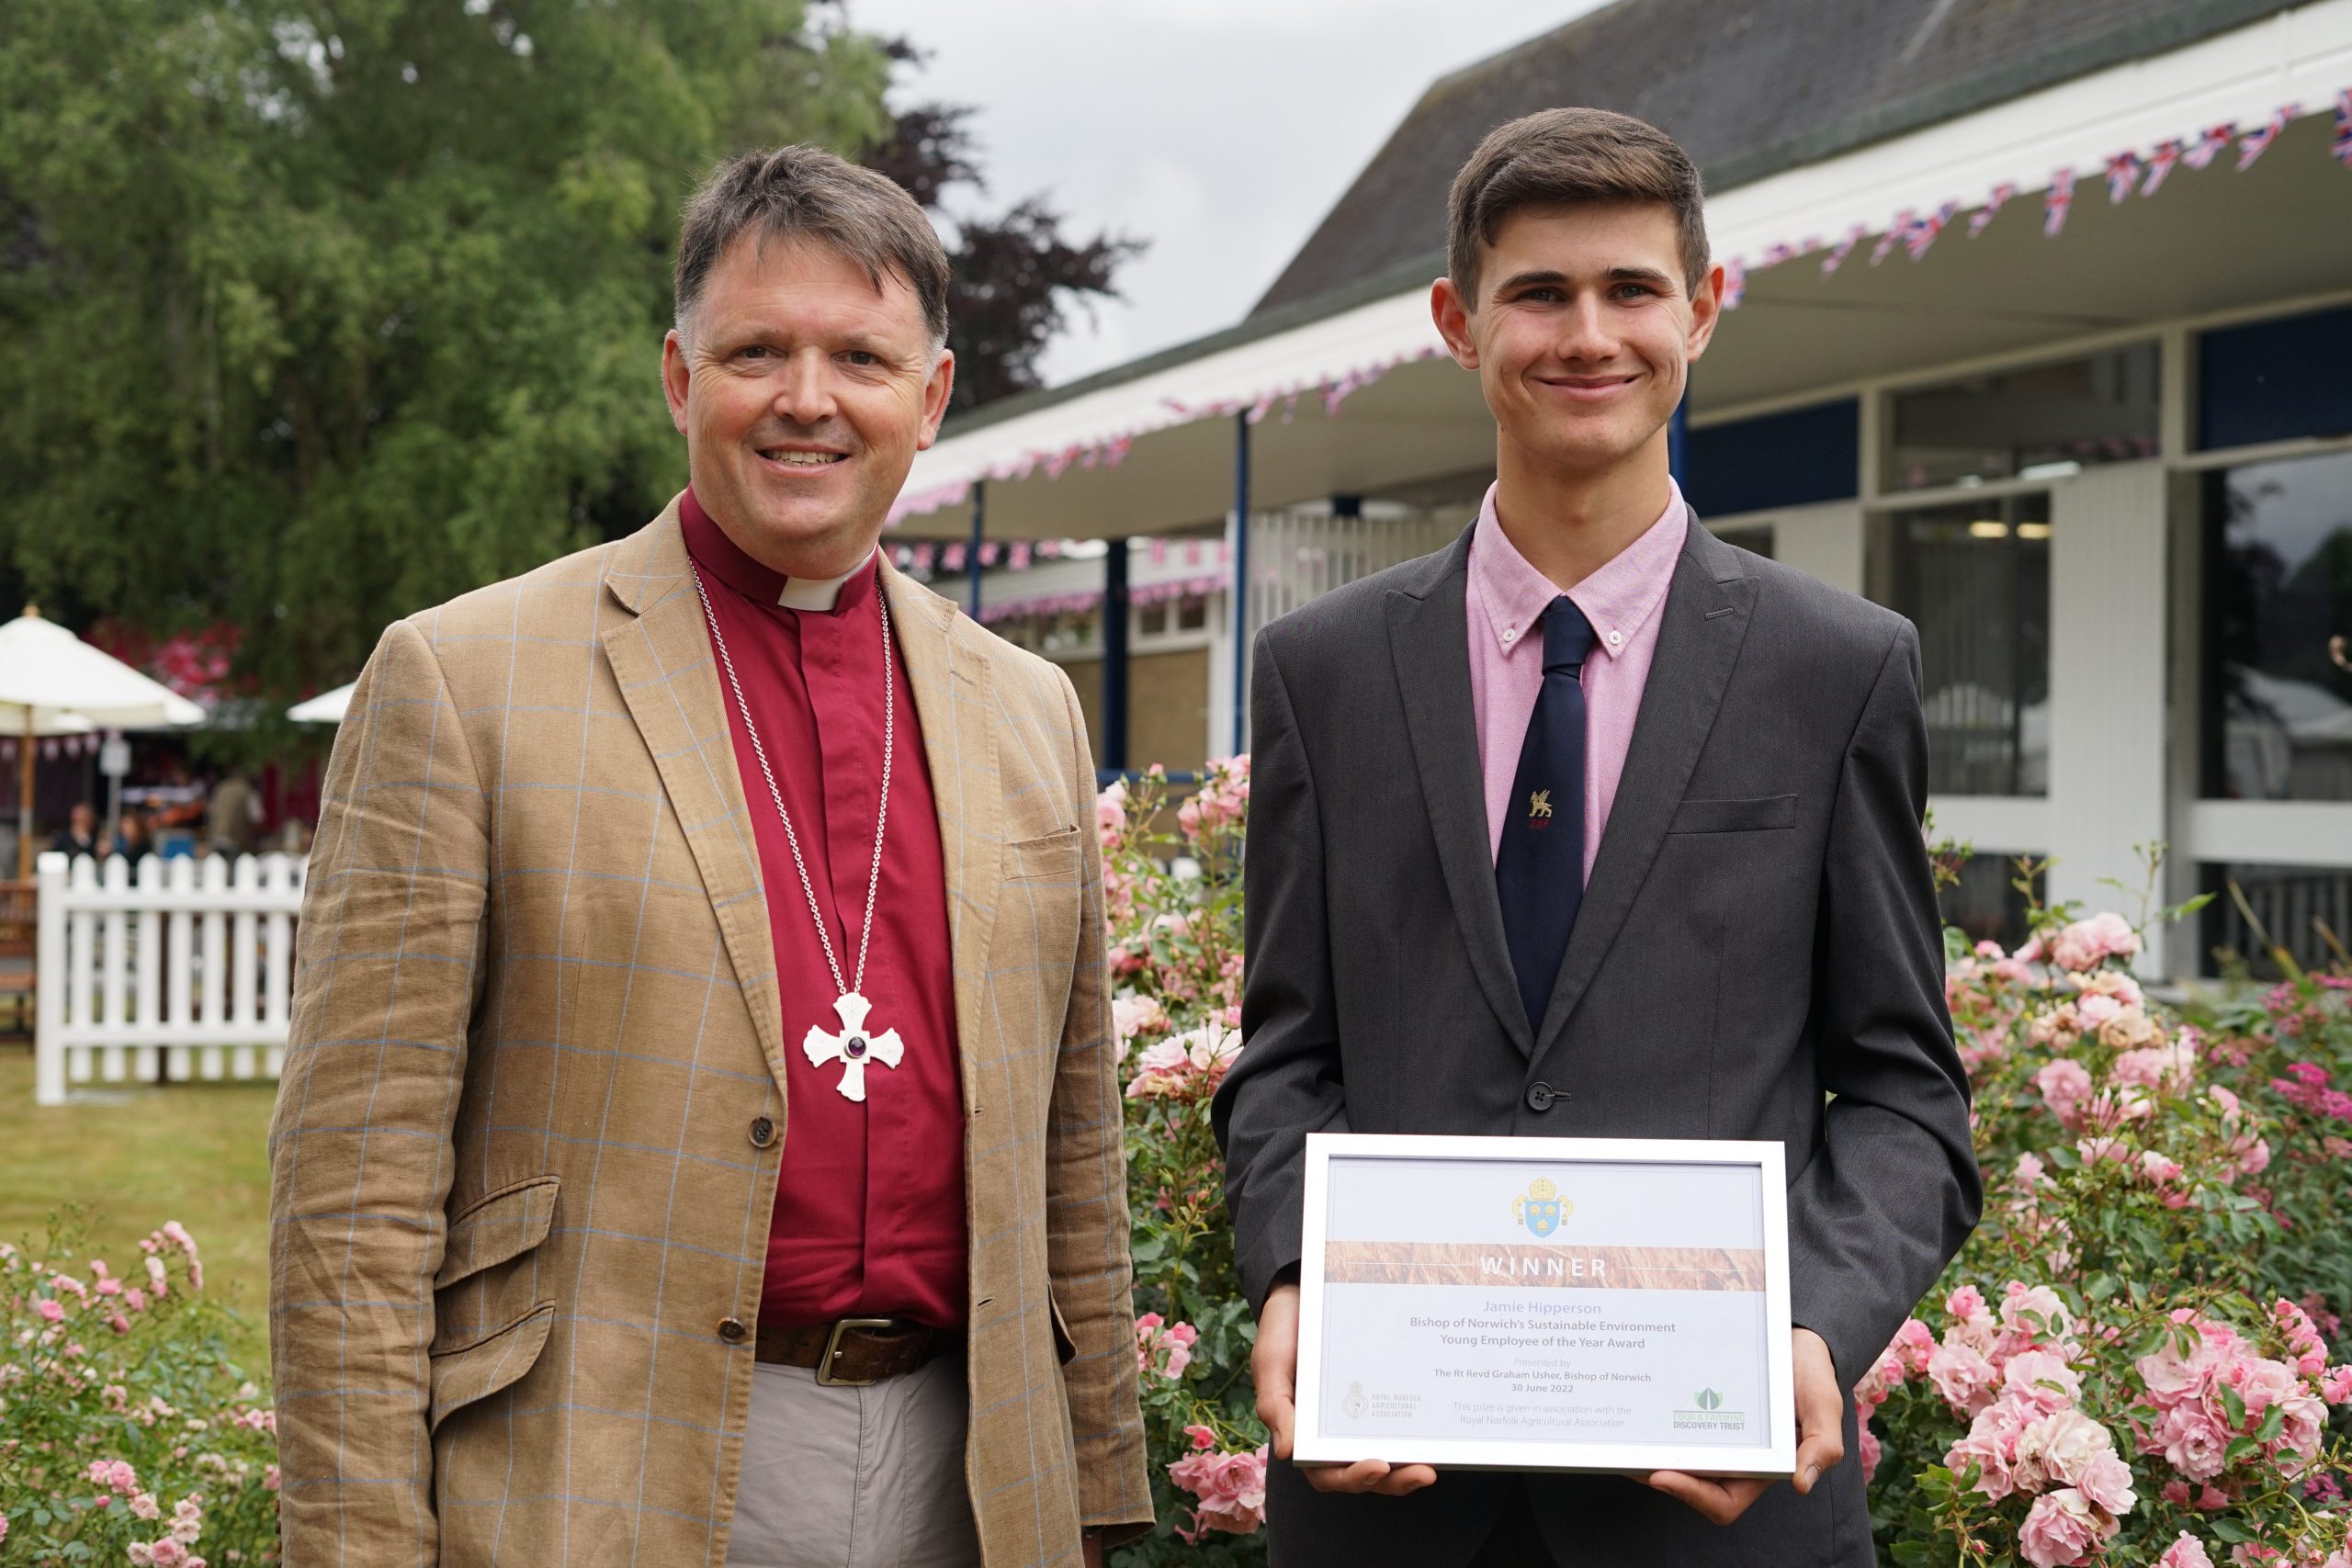 Bishop of Norwich presents Sustainable Environment Employee Award 2022